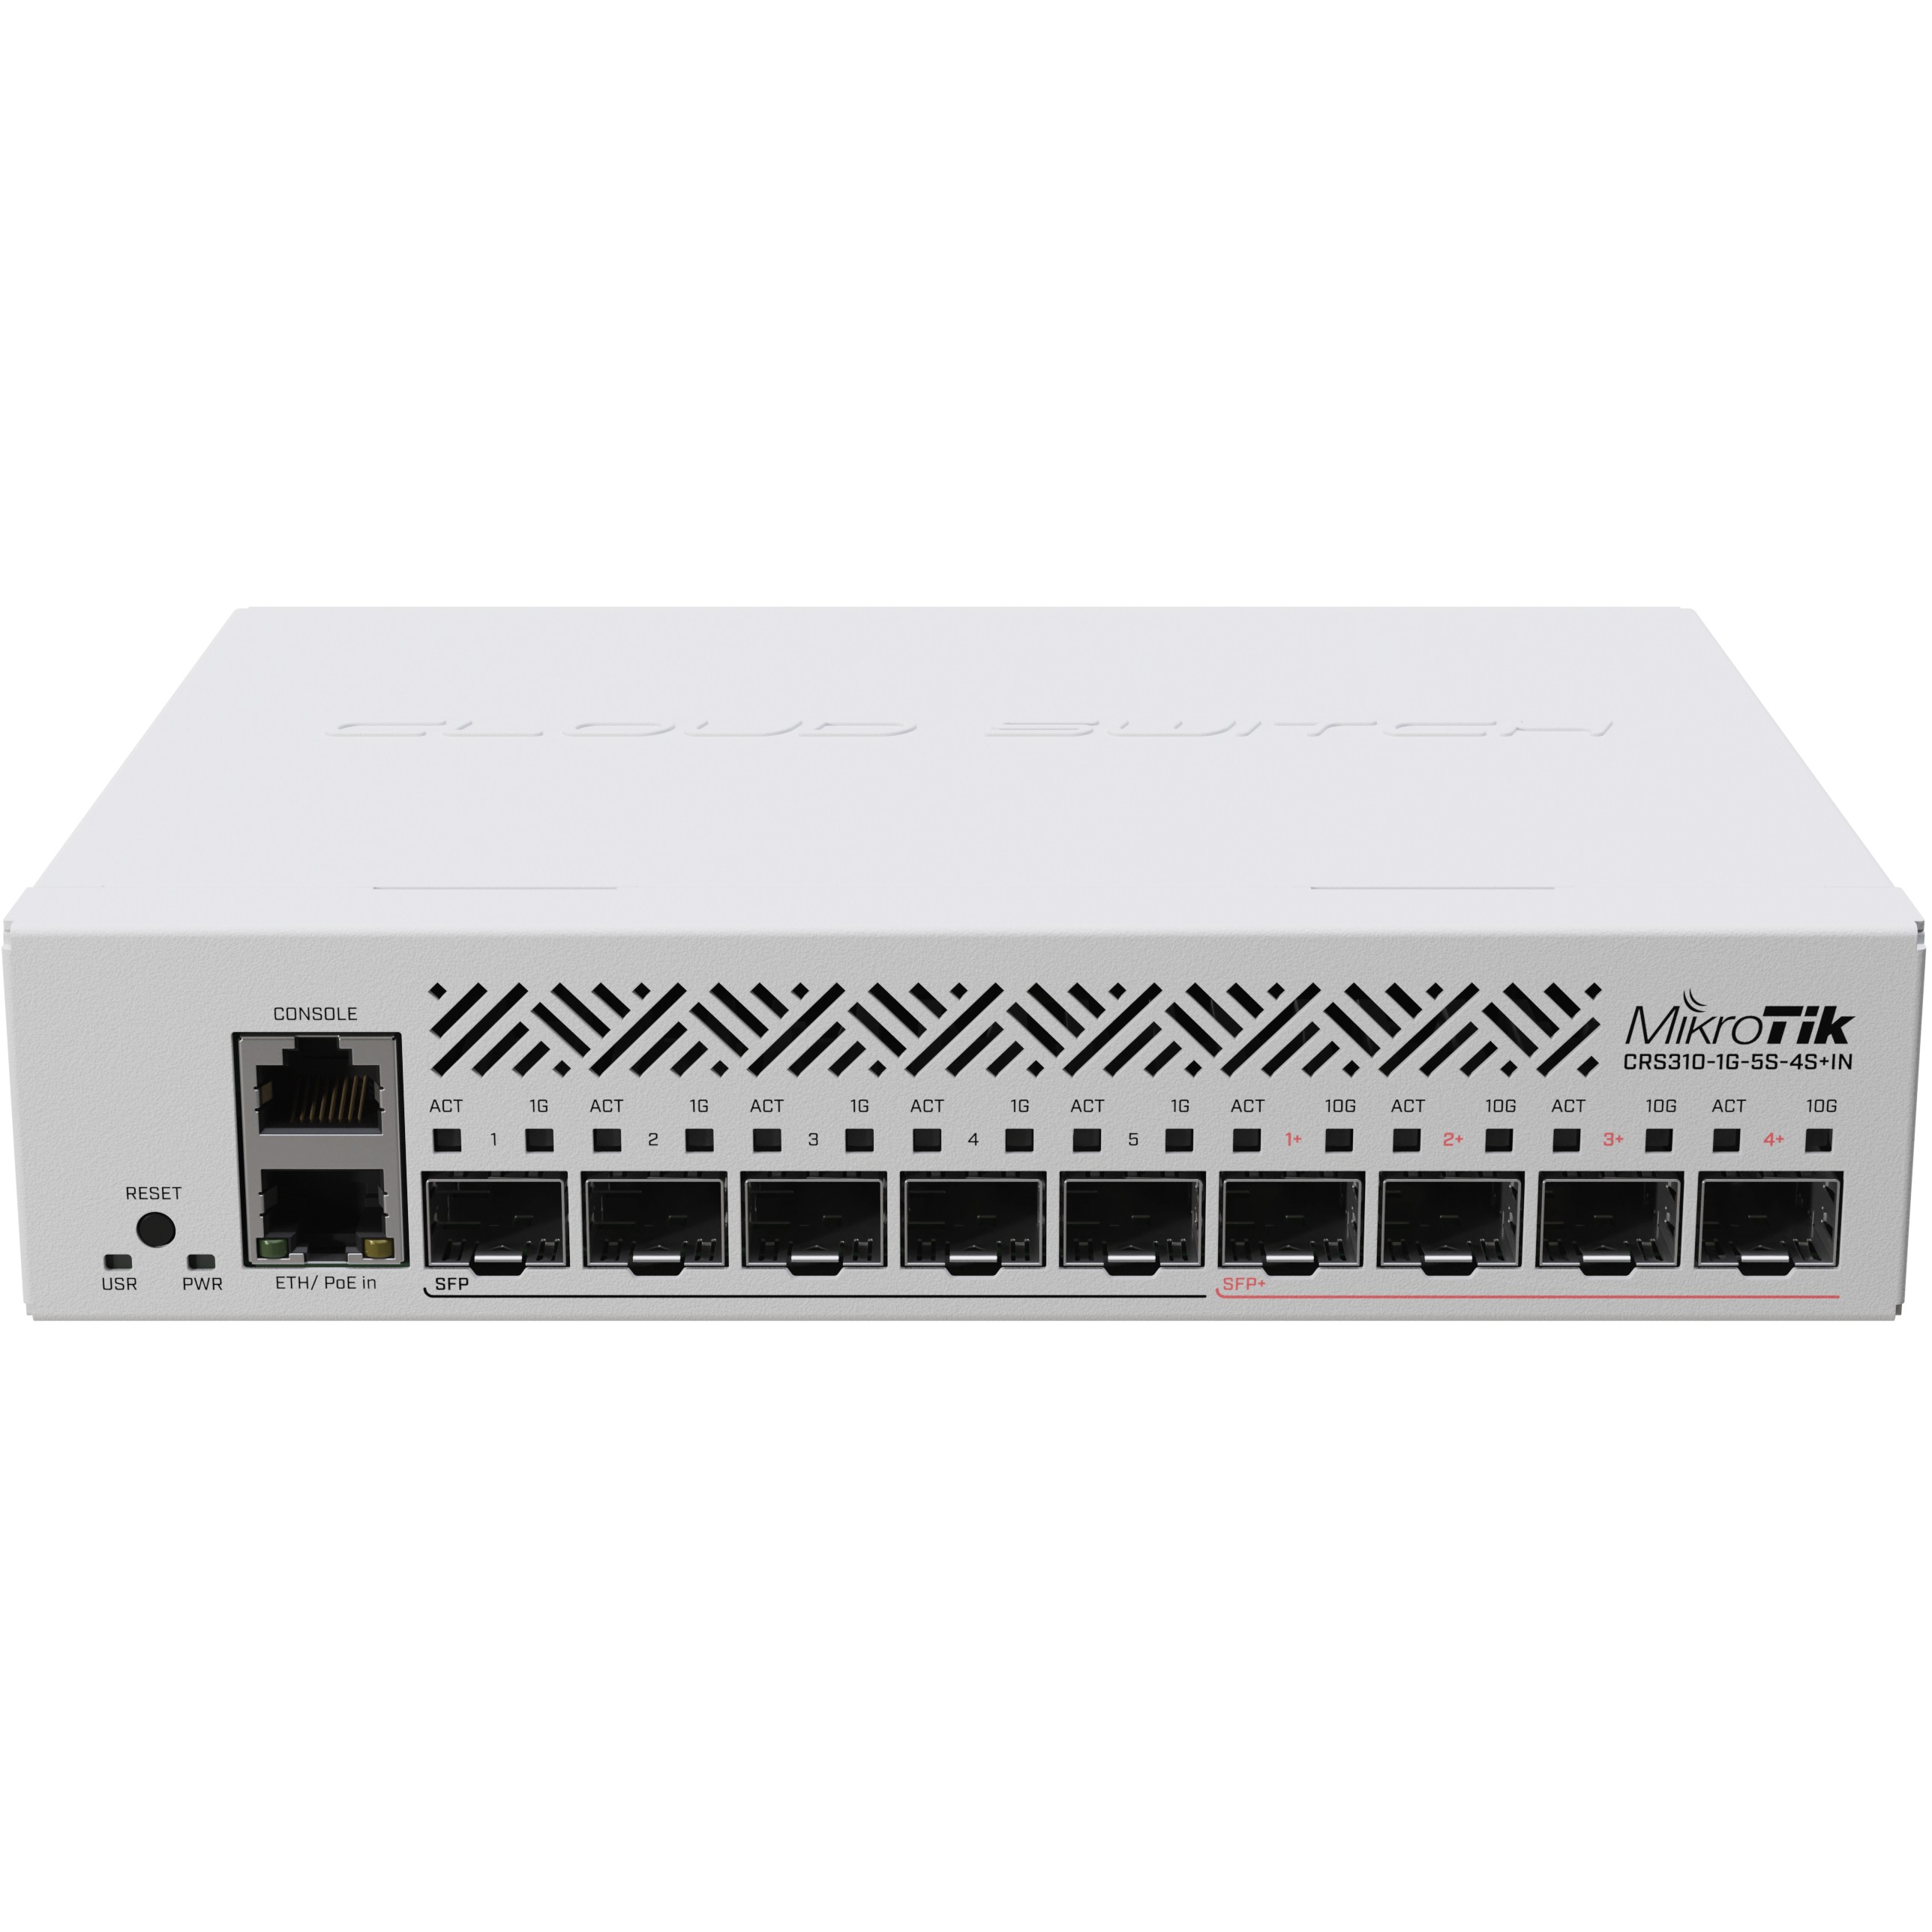 Mikrotik CRS310-1G-5S-4S+IN network switch